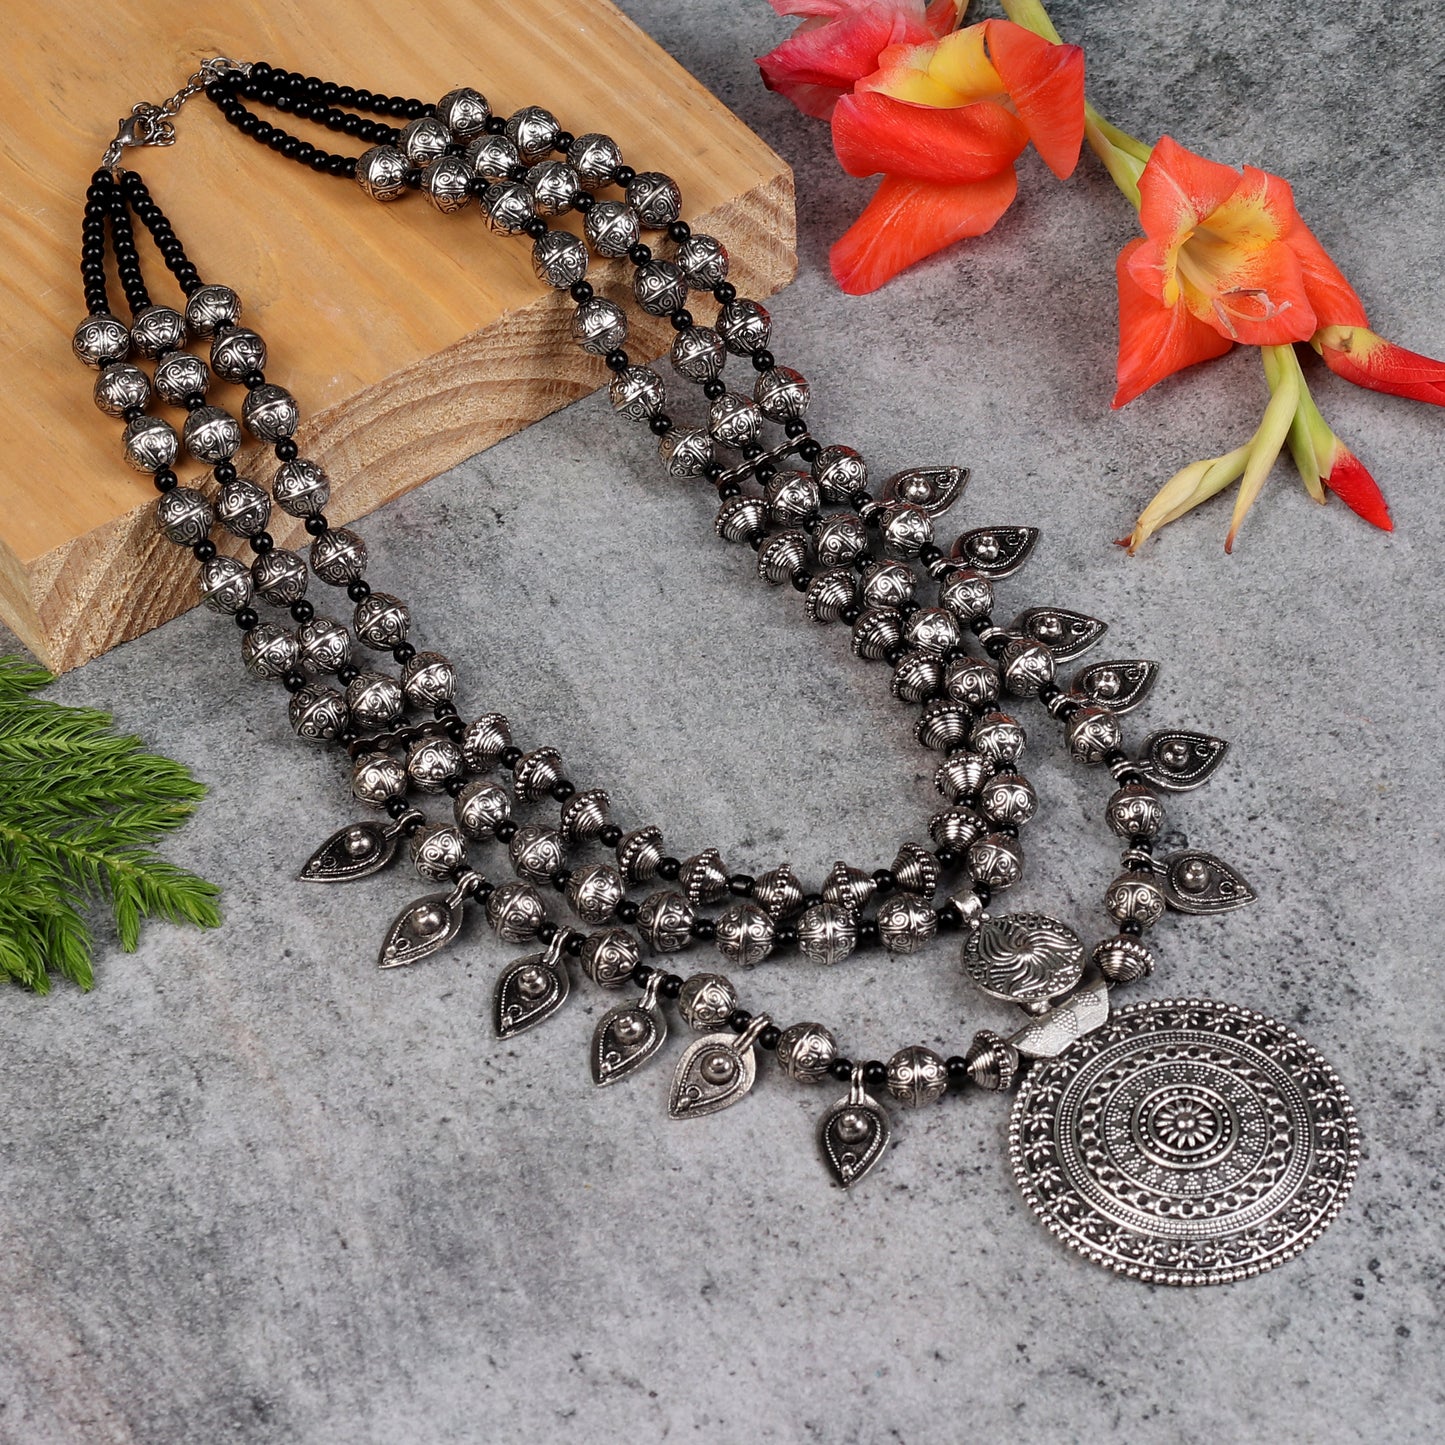 The Glorious Regalia Multilayered Necklace in Oxidized Silver